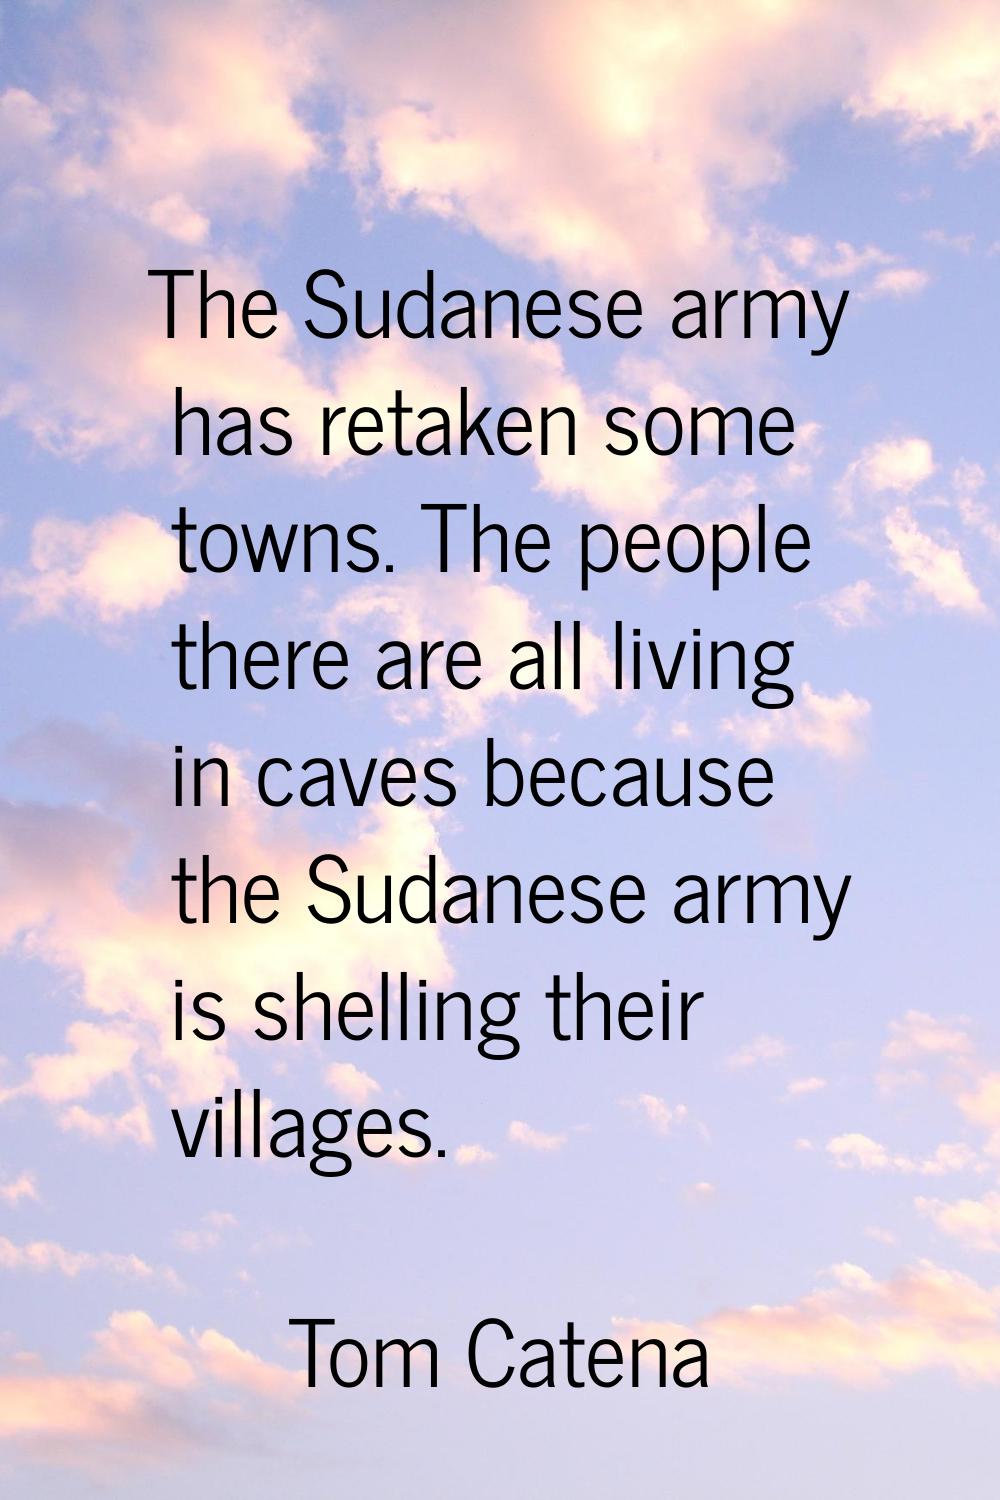 The Sudanese army has retaken some towns. The people there are all living in caves because the Suda